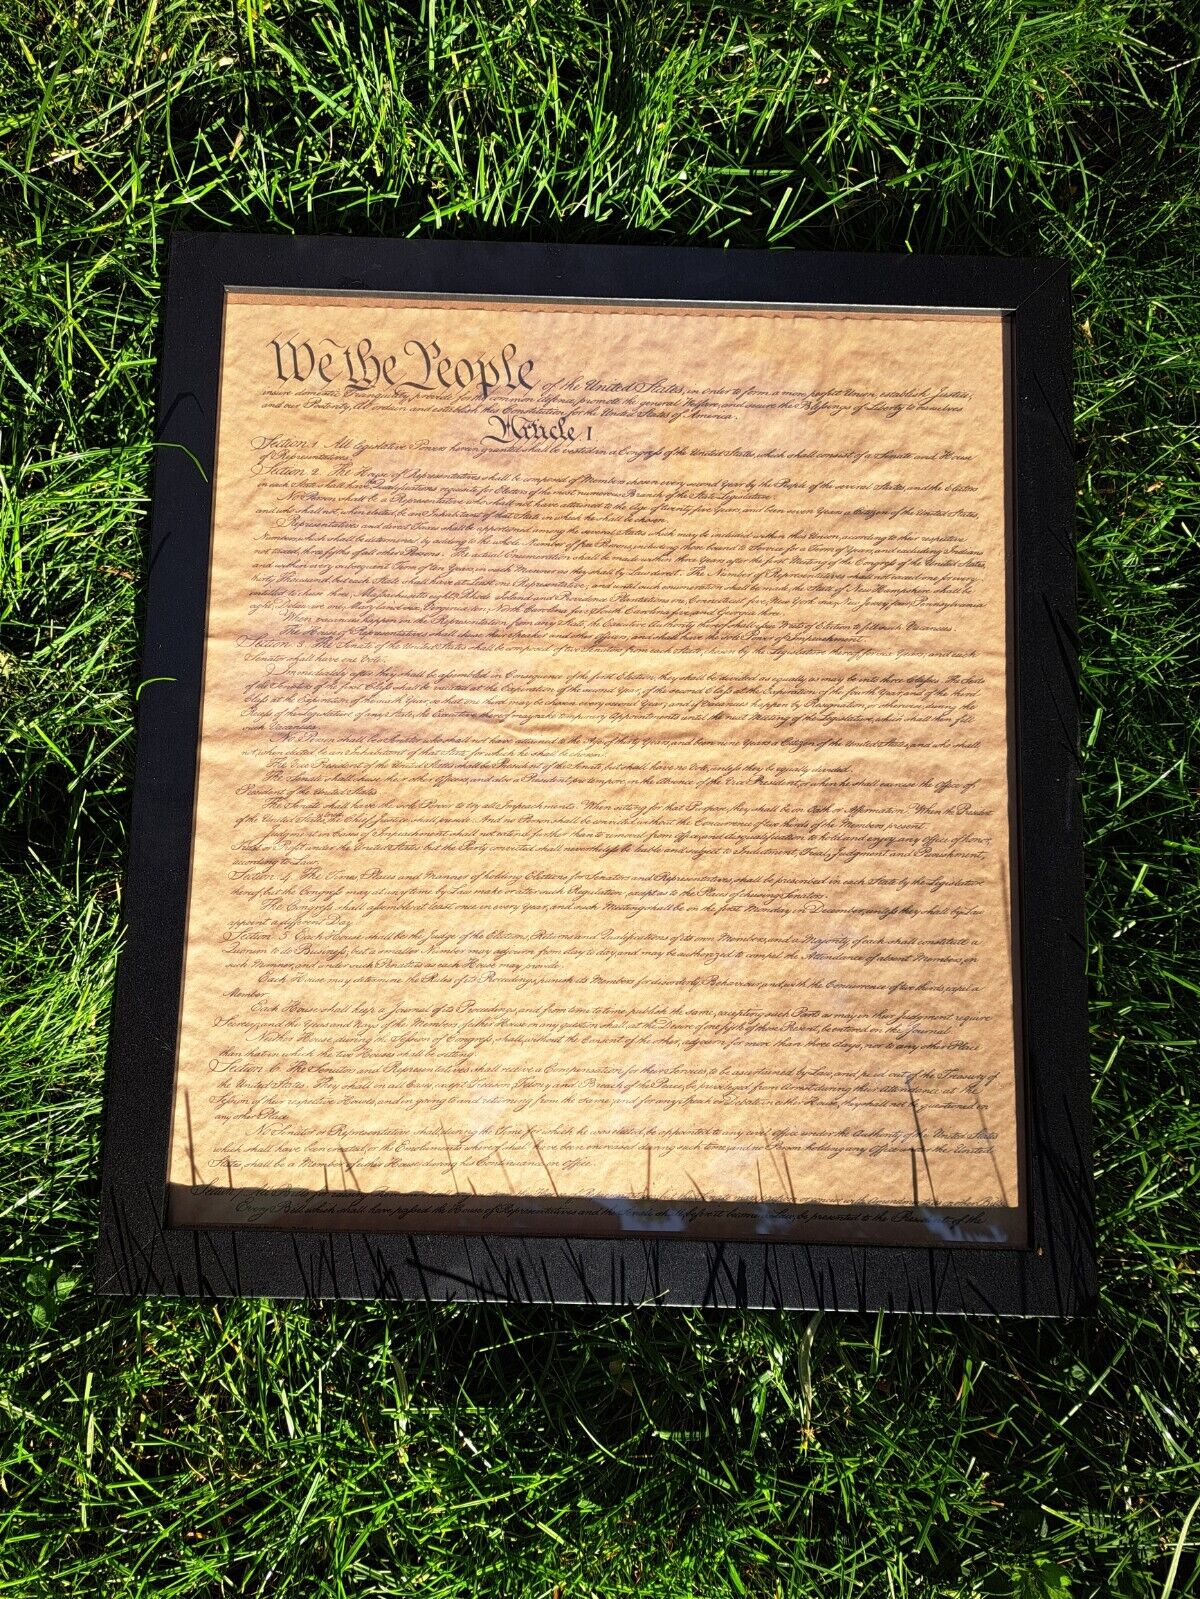 CONSTITUTION OF THE UNITED STATES OF AMERICA PRINTED PARCHMENT PAPER FRAMED